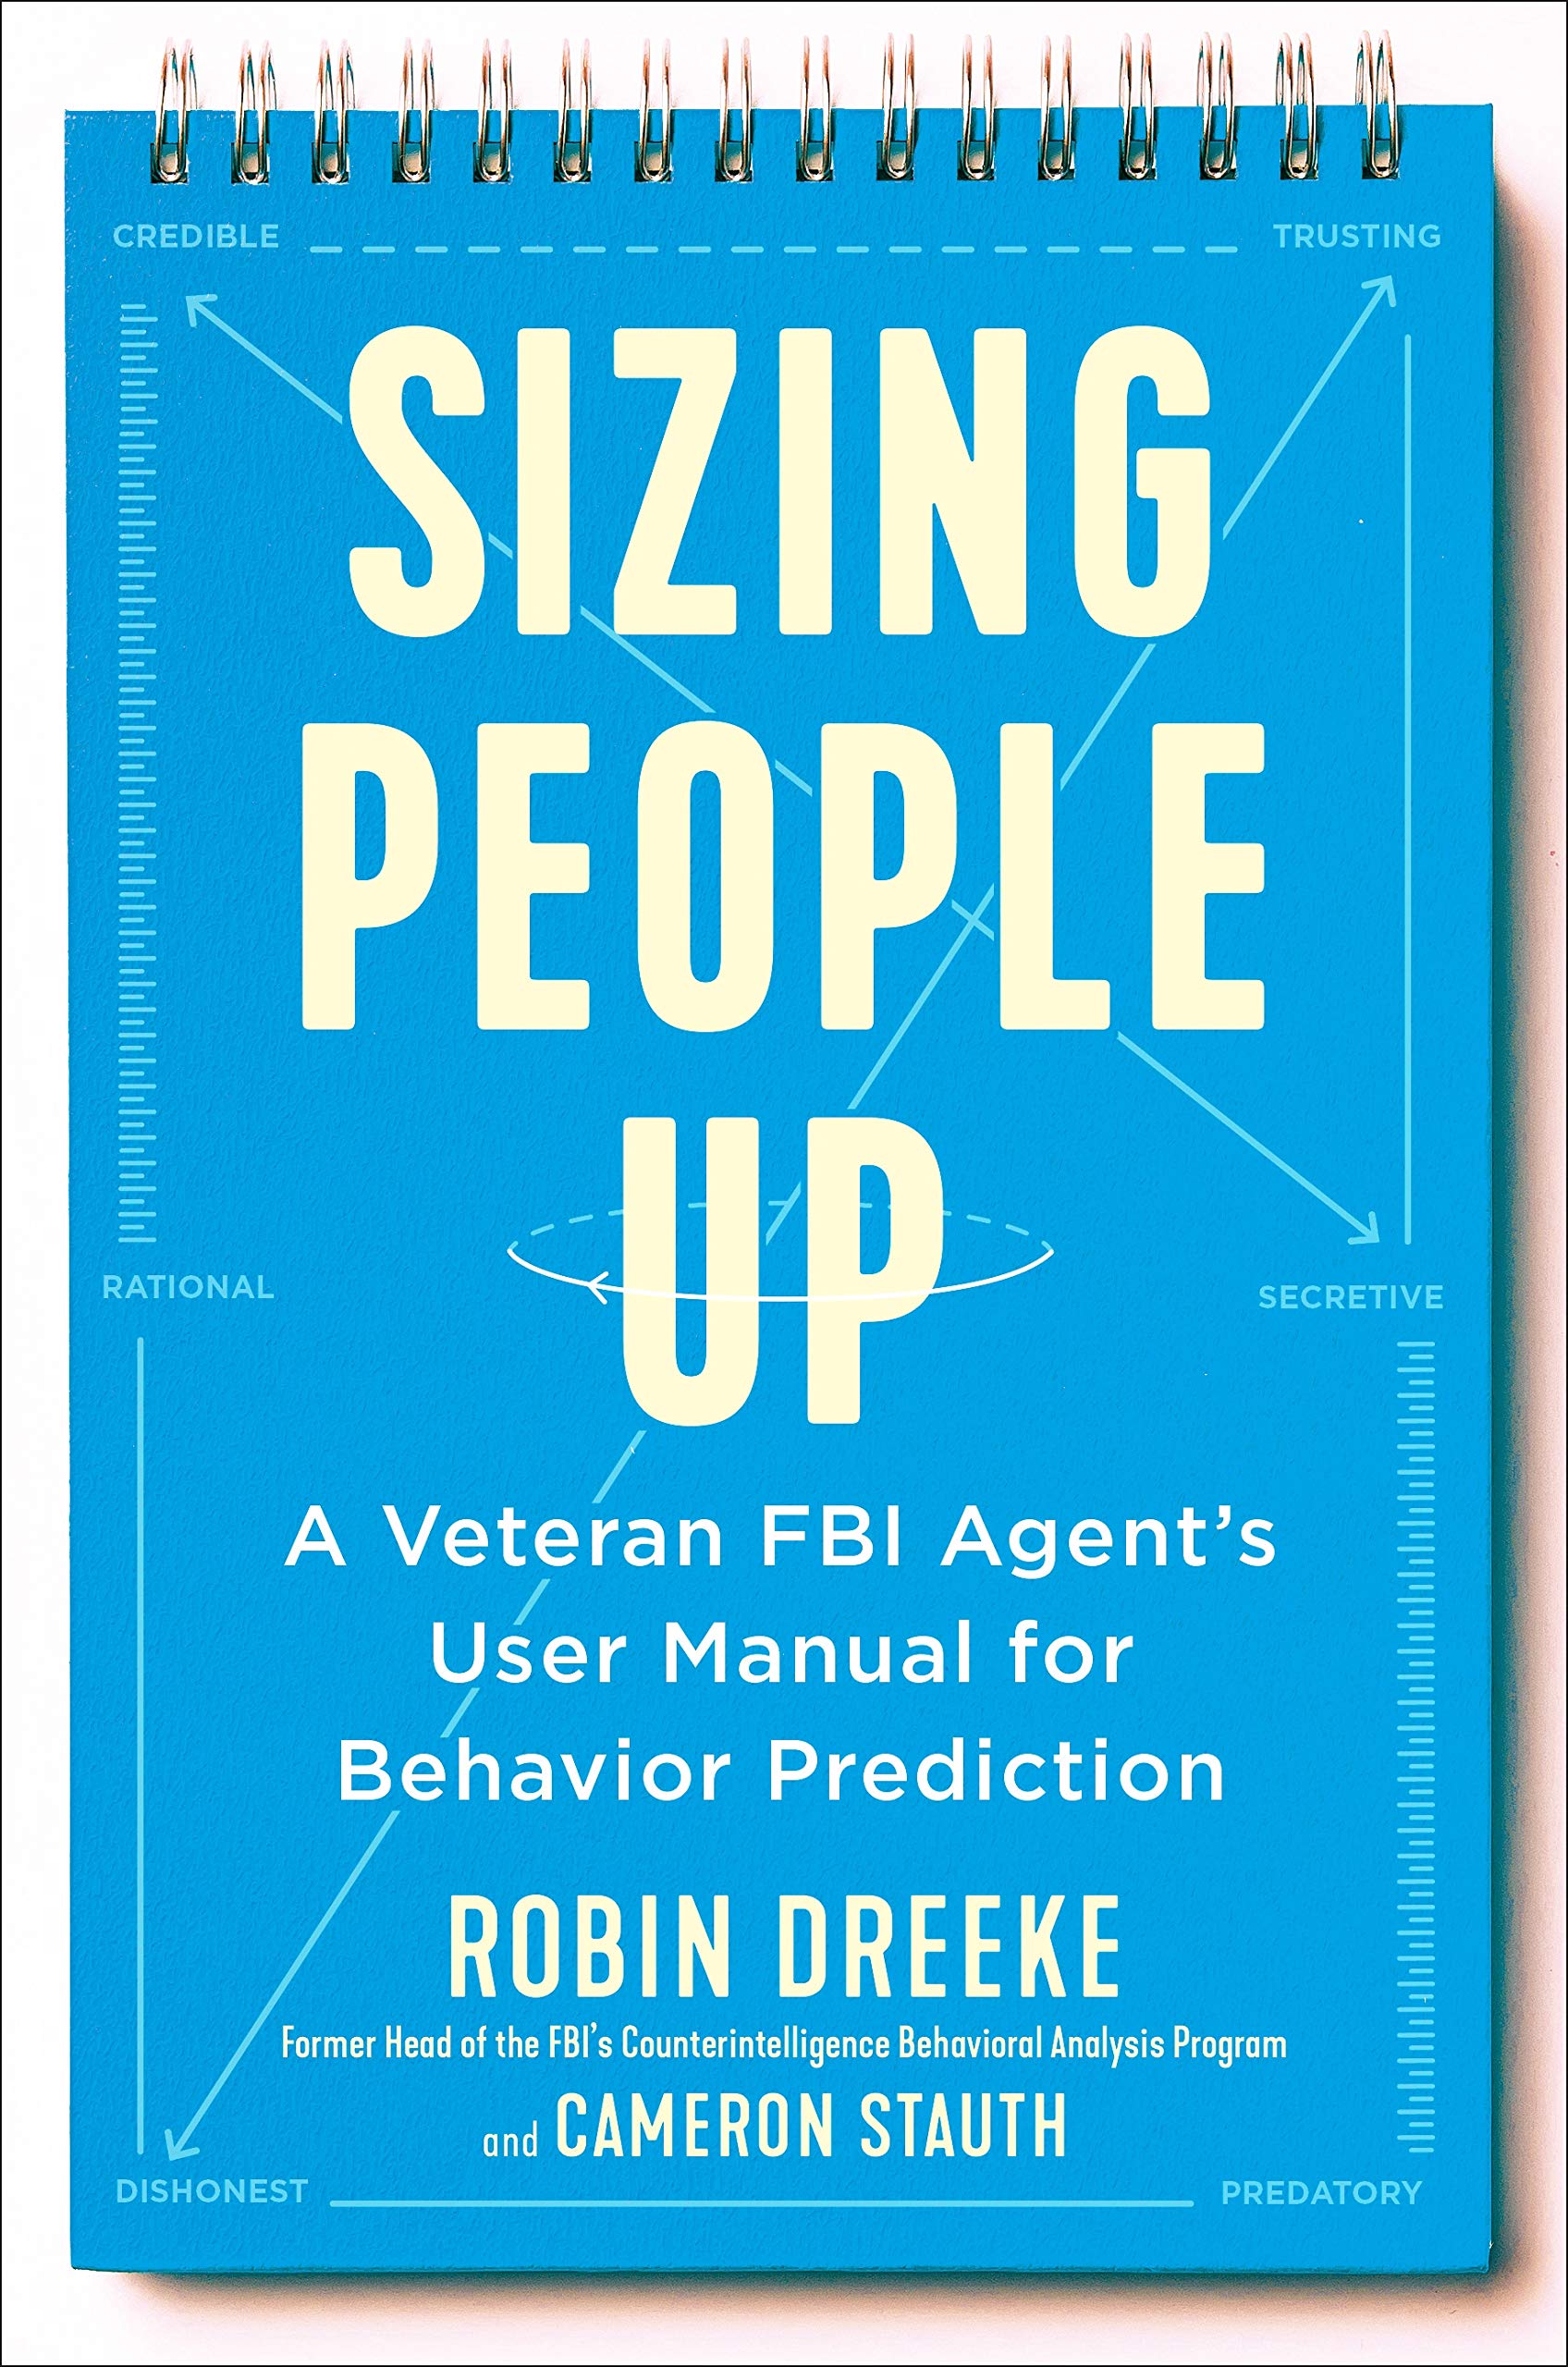 Sizing People Up by Robin Dreeke book cover.